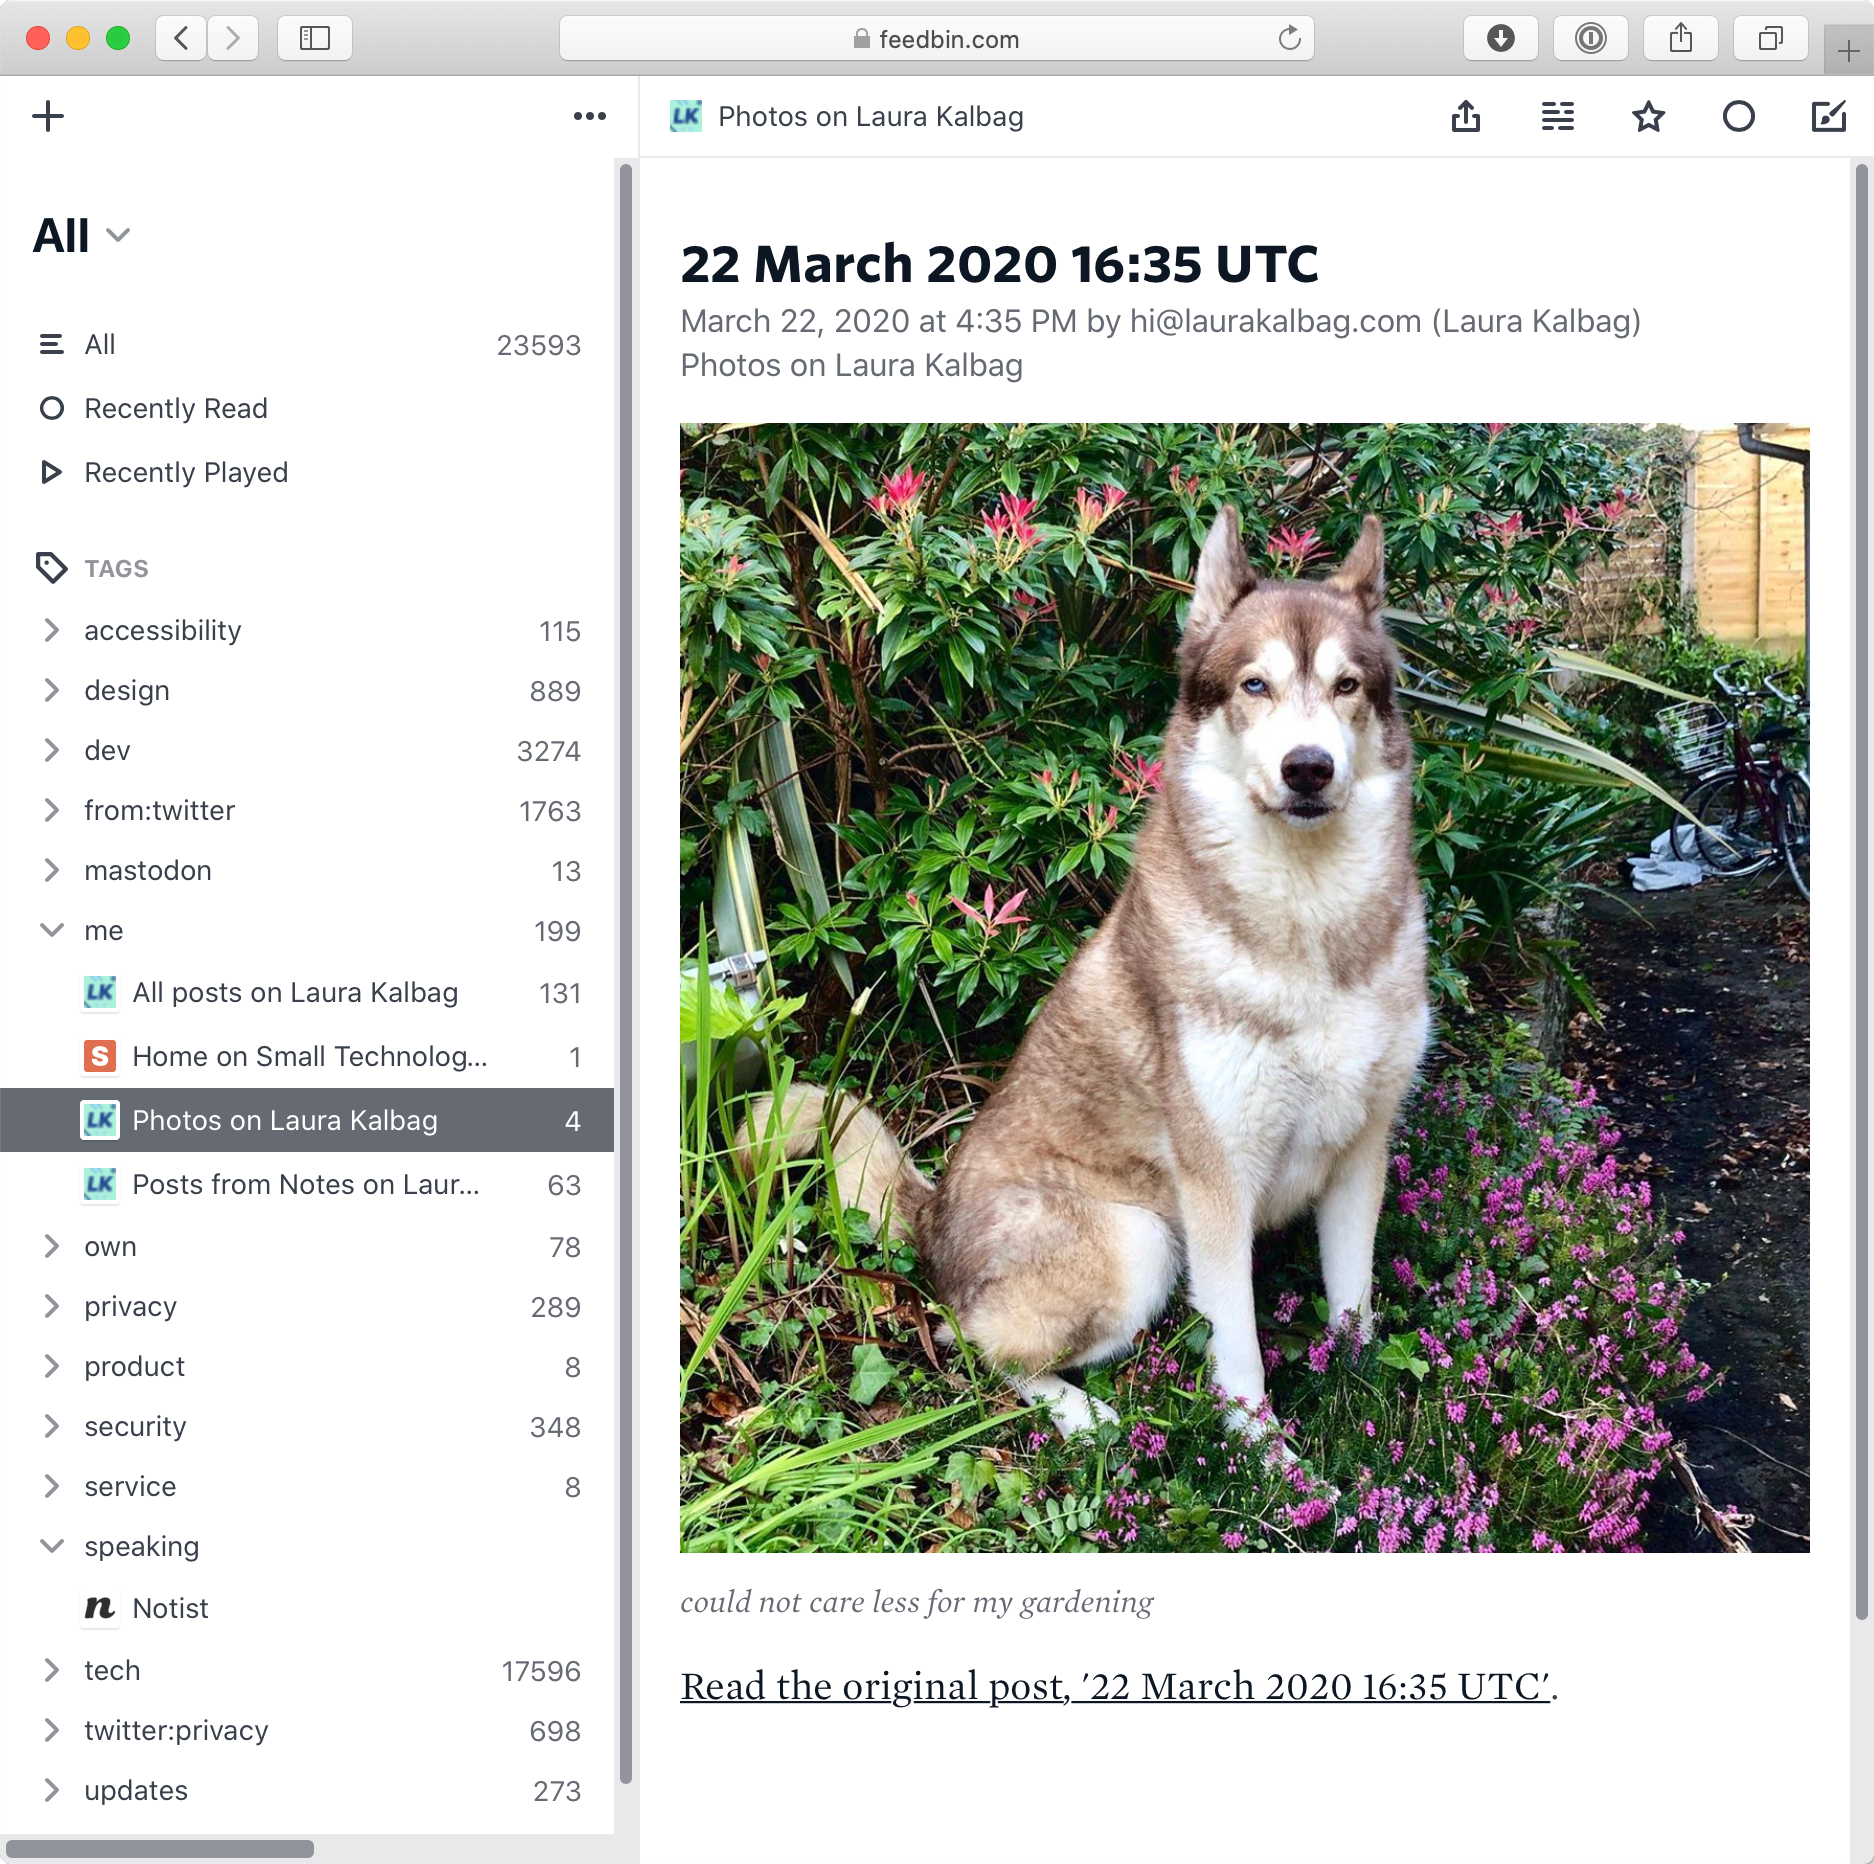 A photo of a dog in a flowerbed, displayed in the Feedbin interface in the browser.